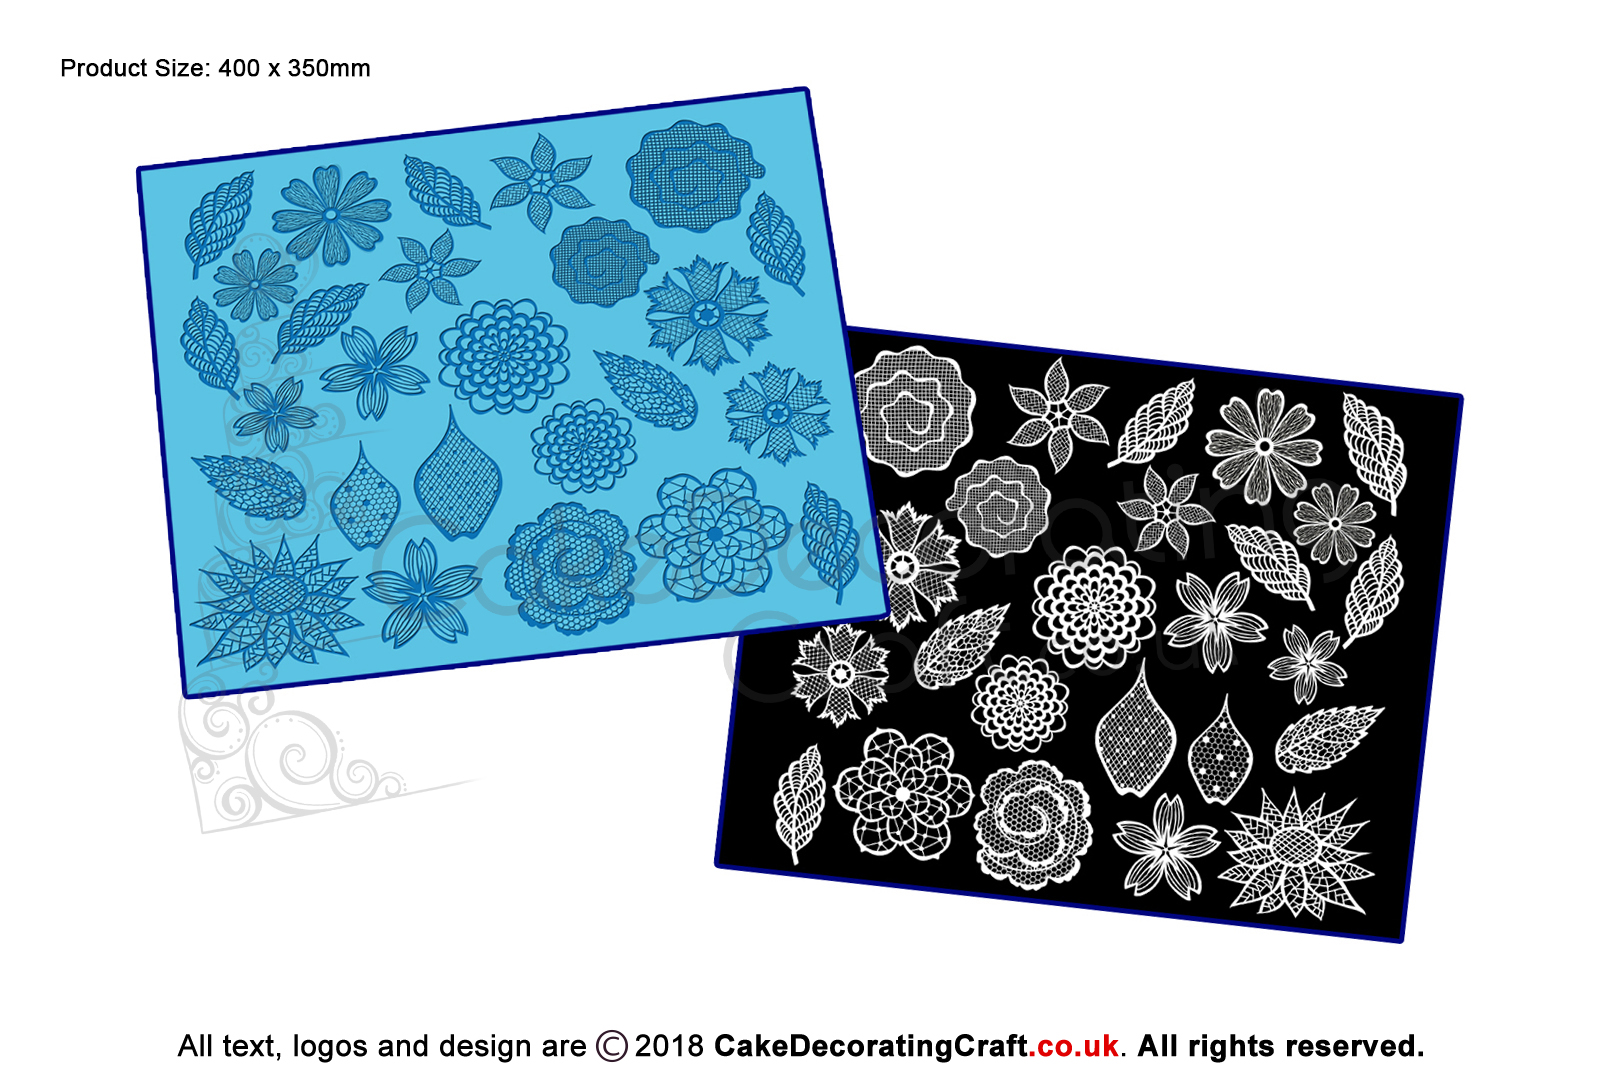 Floral Fantasy 2 | Cake Lace Mats for Edible Cake Lace Mixes and Premixes | Cake Decorating Craft Tool | Cake Cupcake Cookie | Makers and Decorators | Christmas Gift Ideas